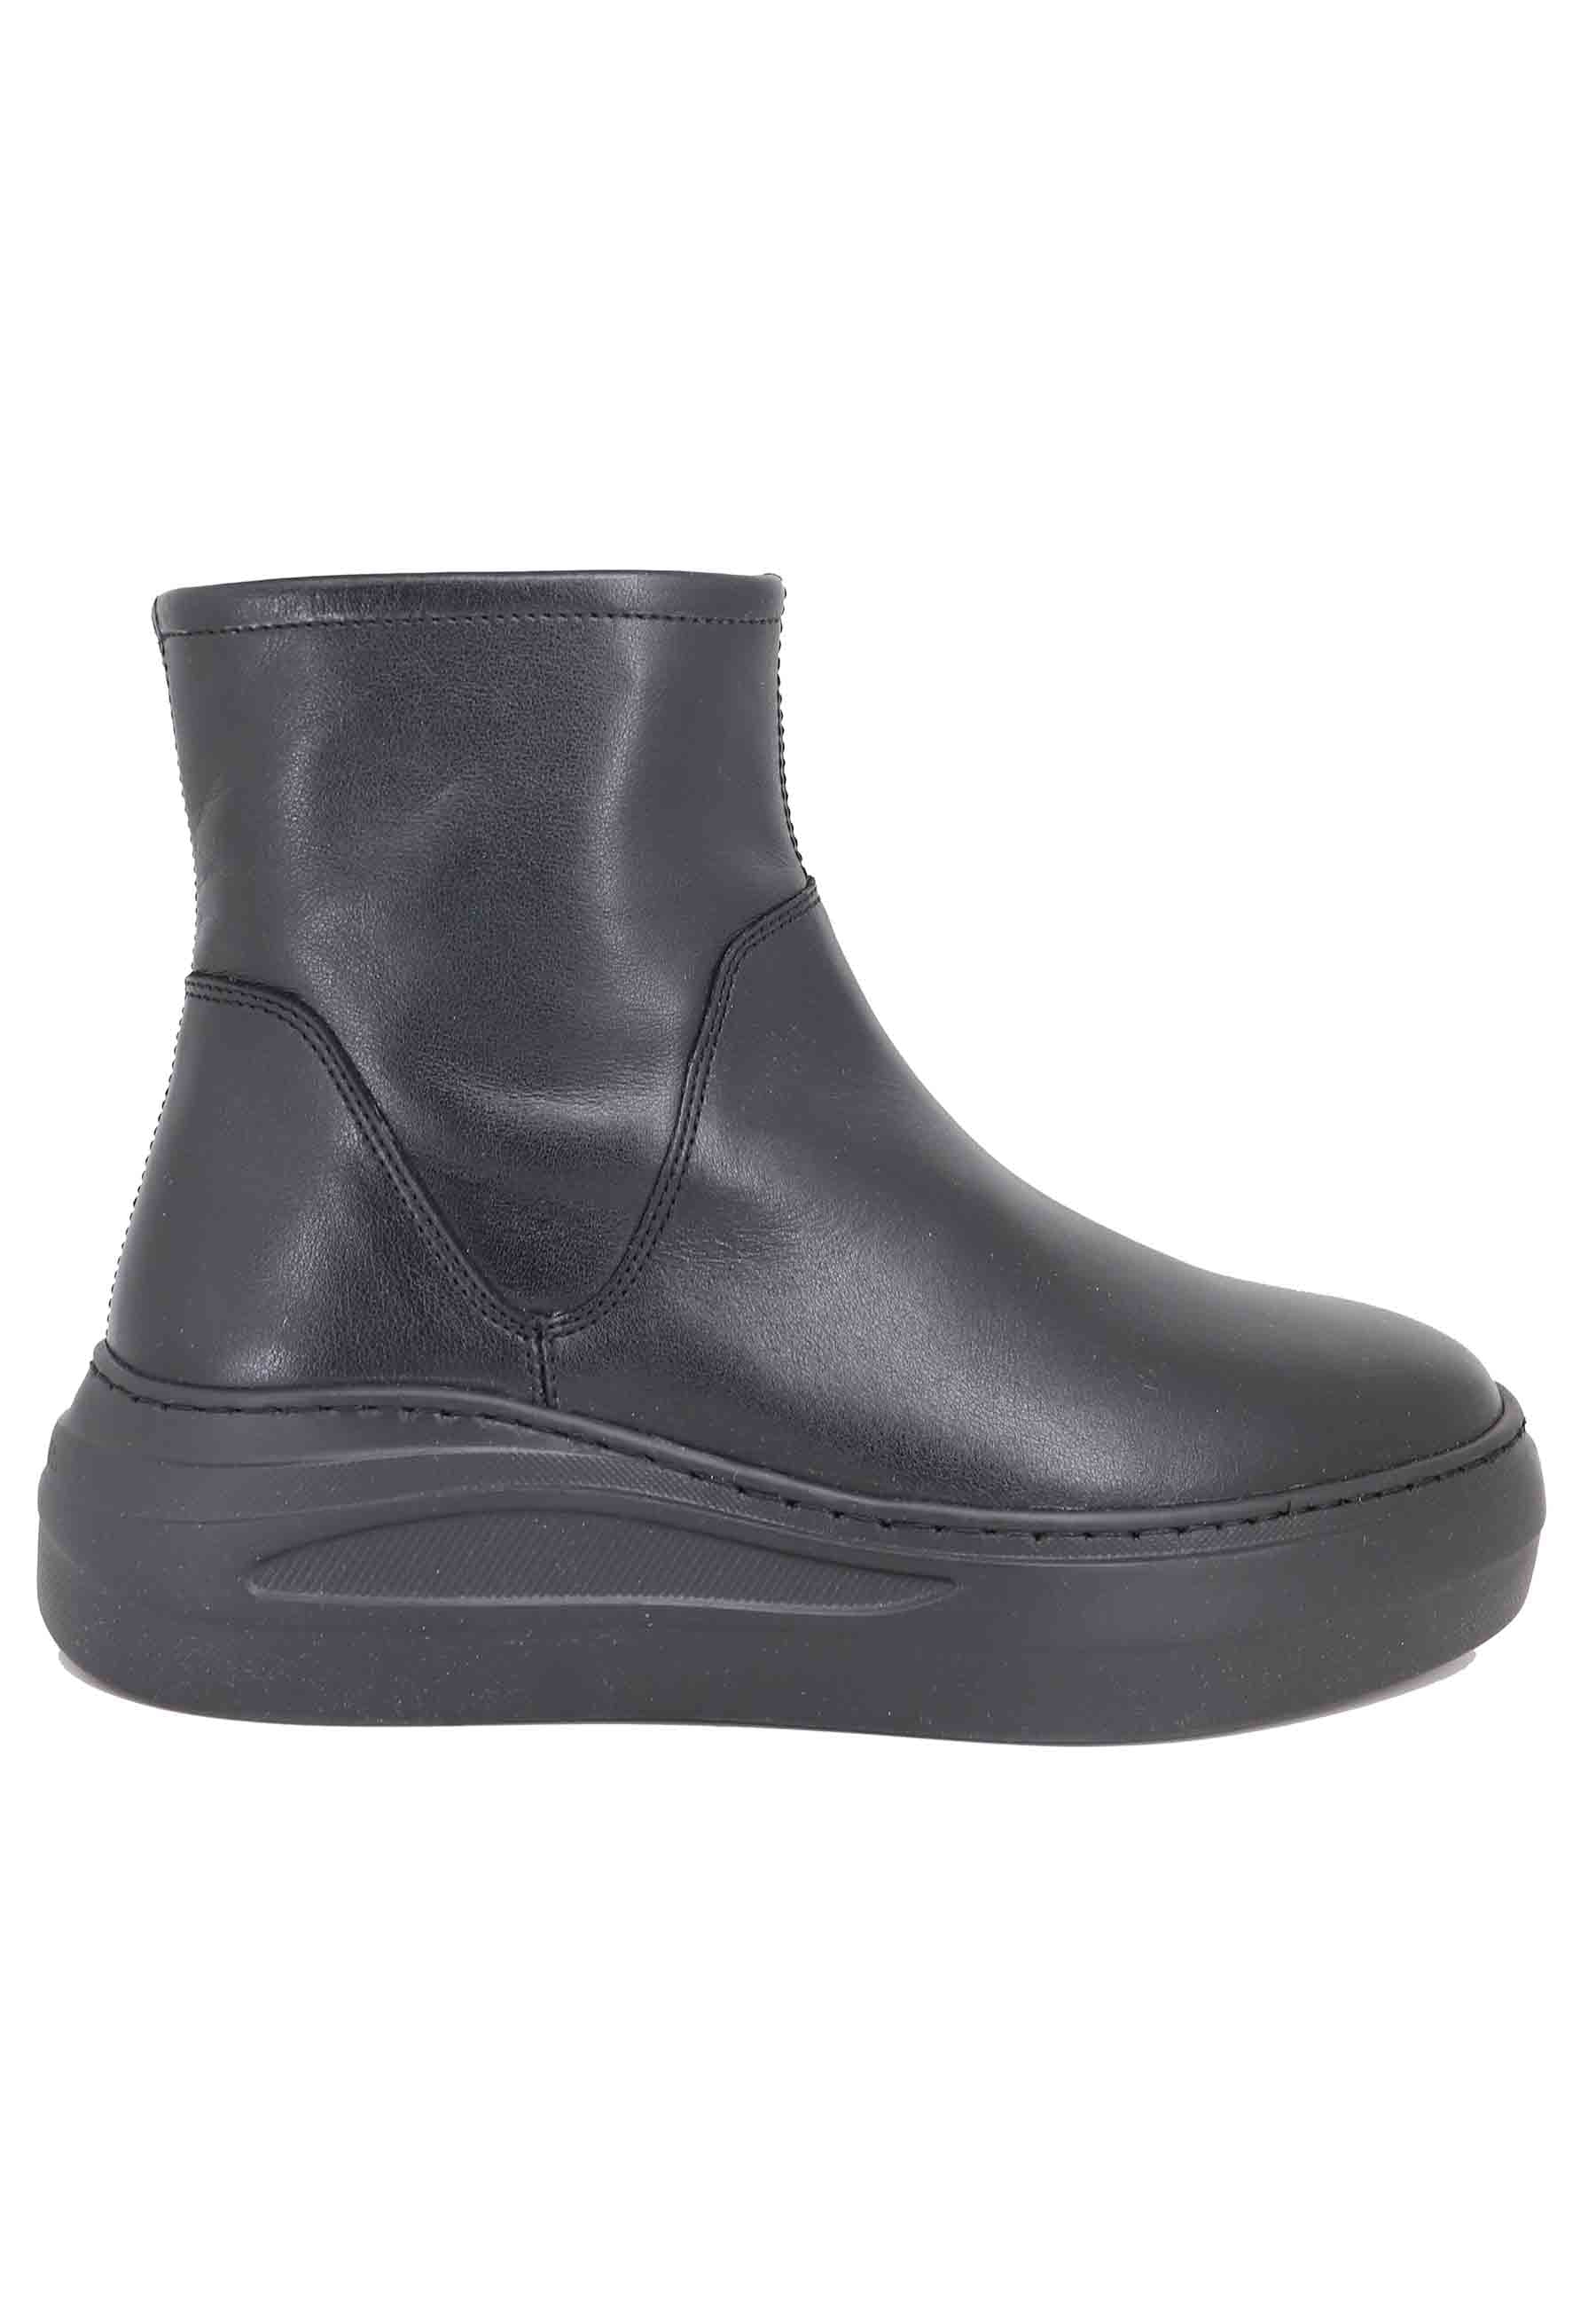 Women's black leather ankle boots with ultra-light rubber wedge